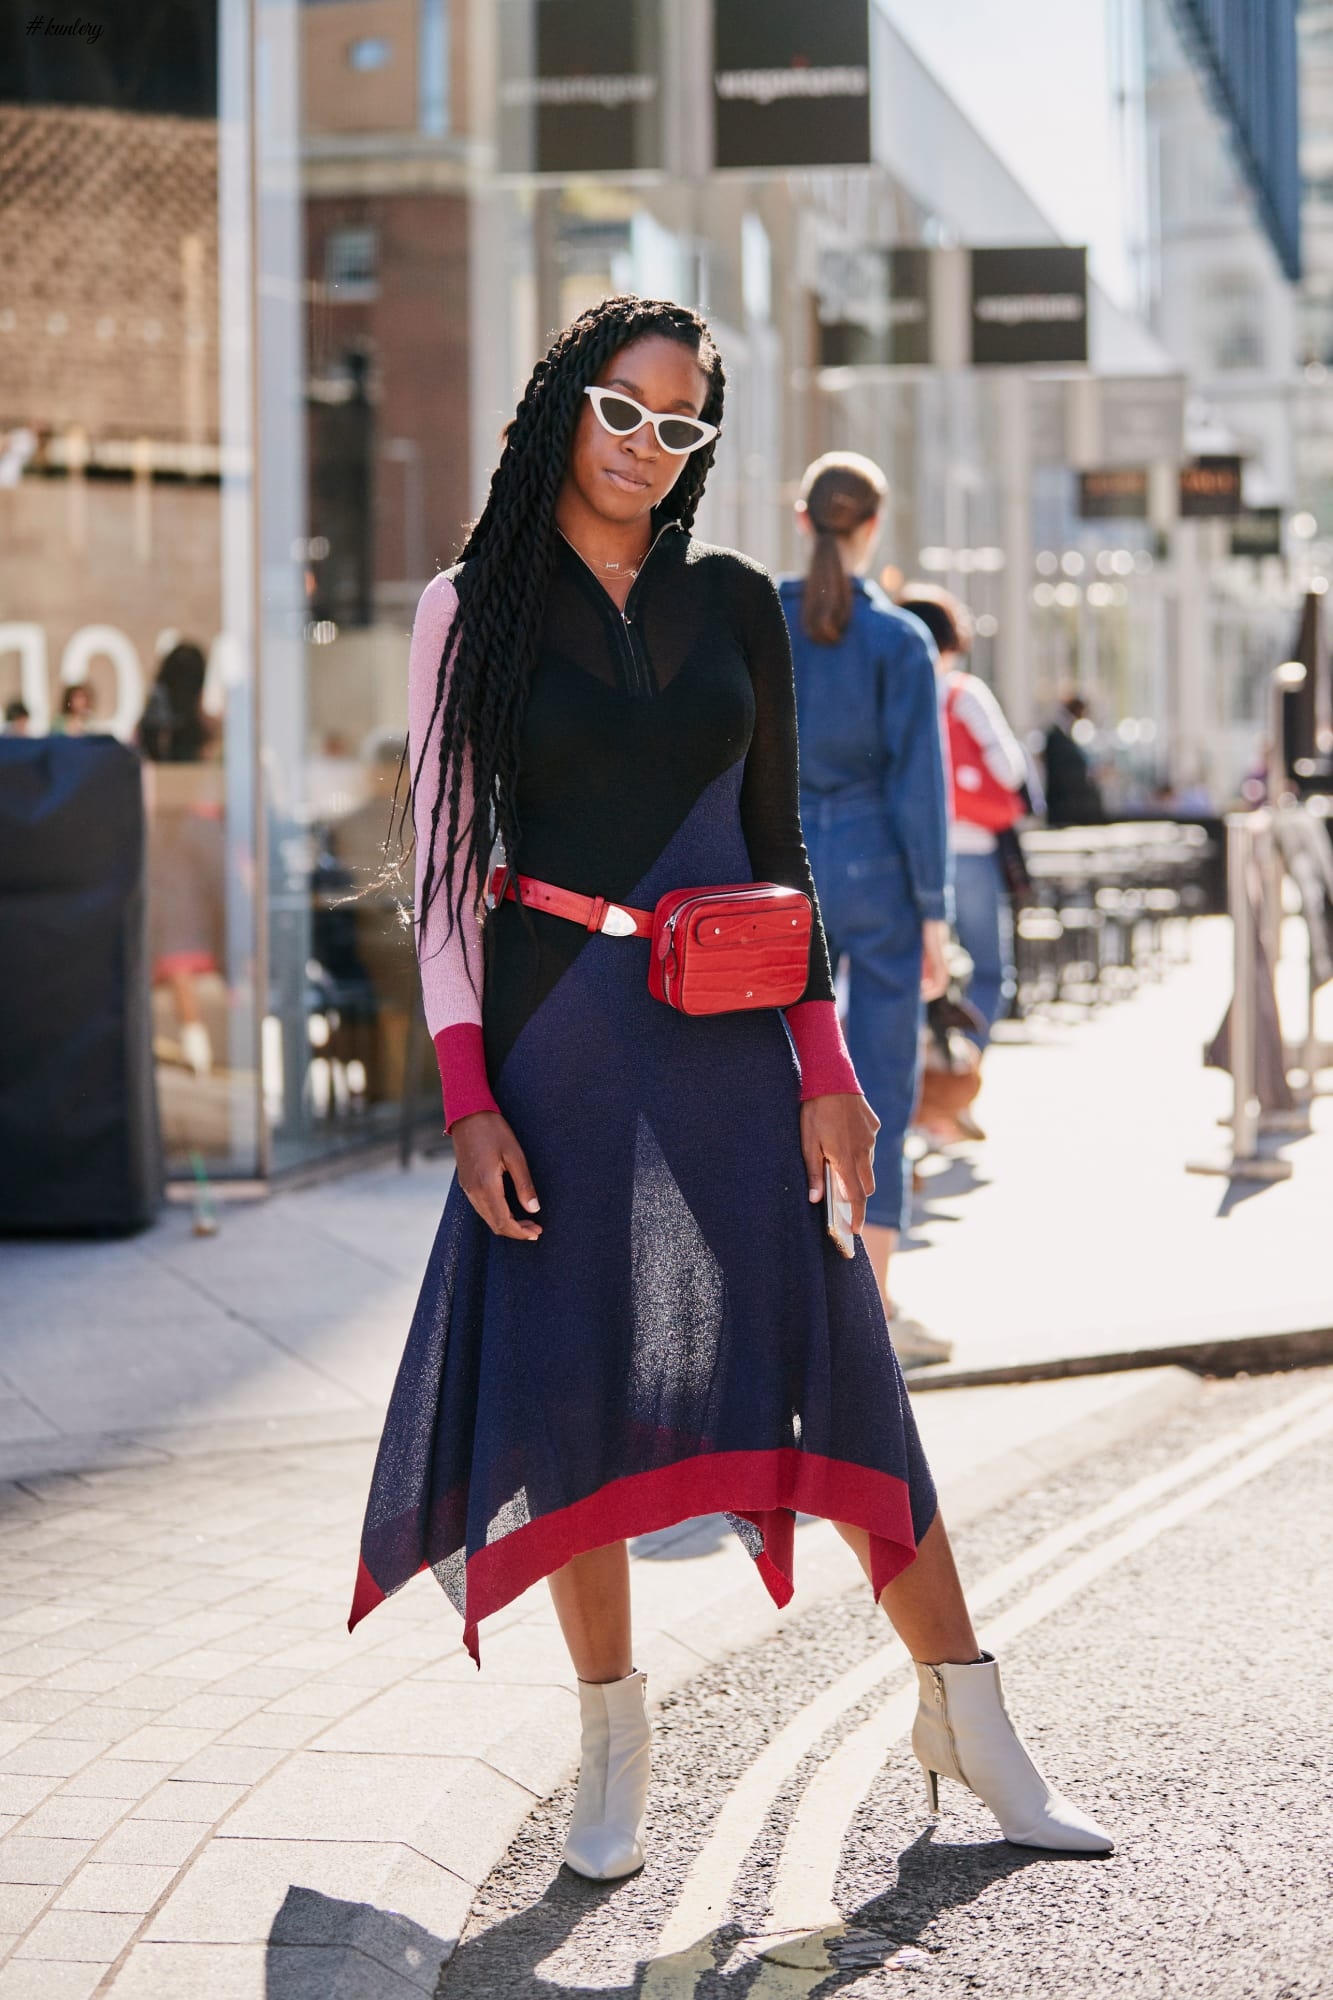 The Best Street Style Look From London Fashion Week!